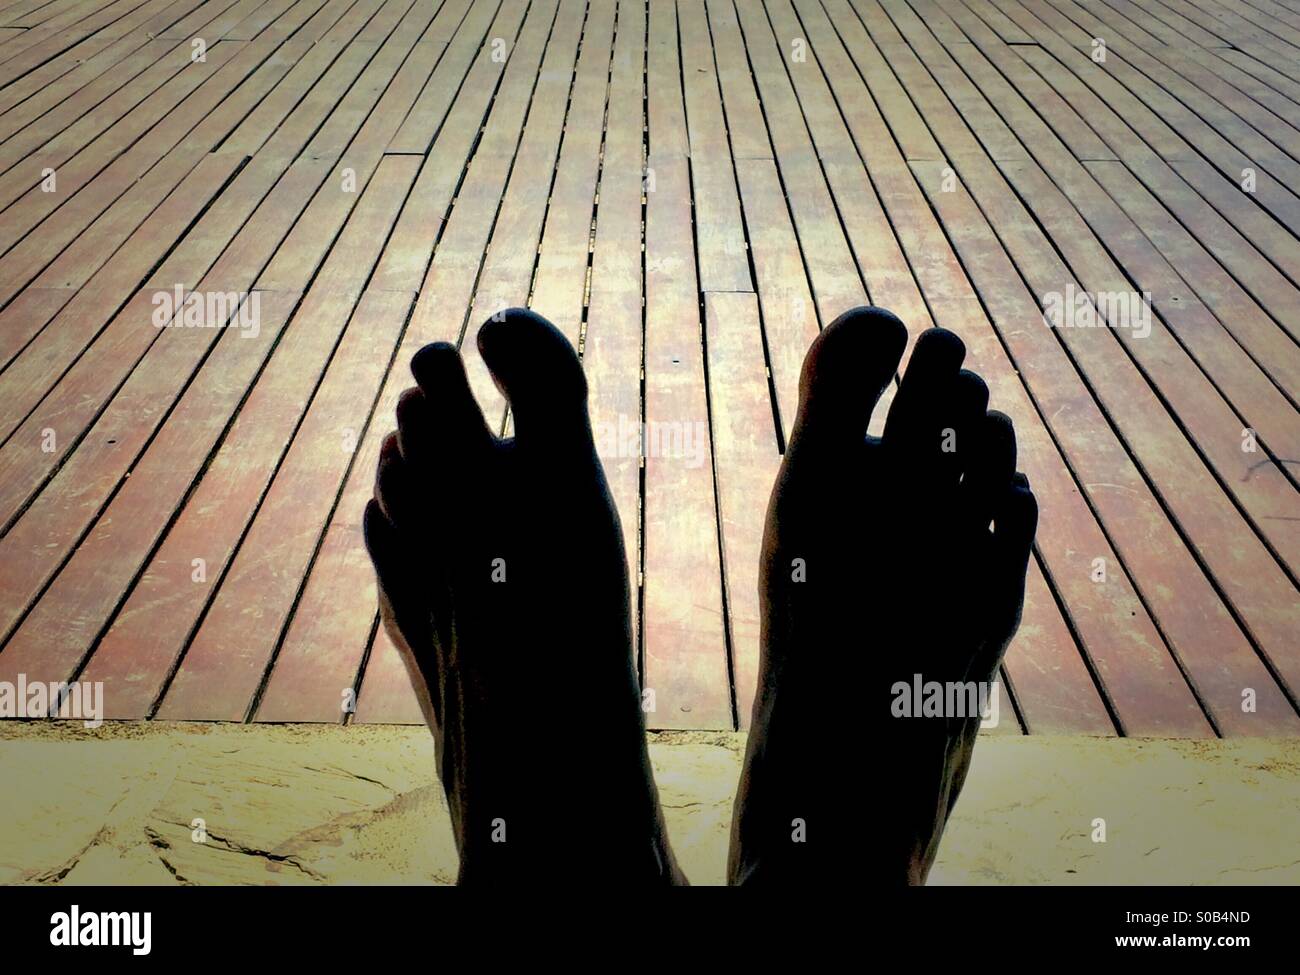 Silhouette of feet against deck Stock Photo